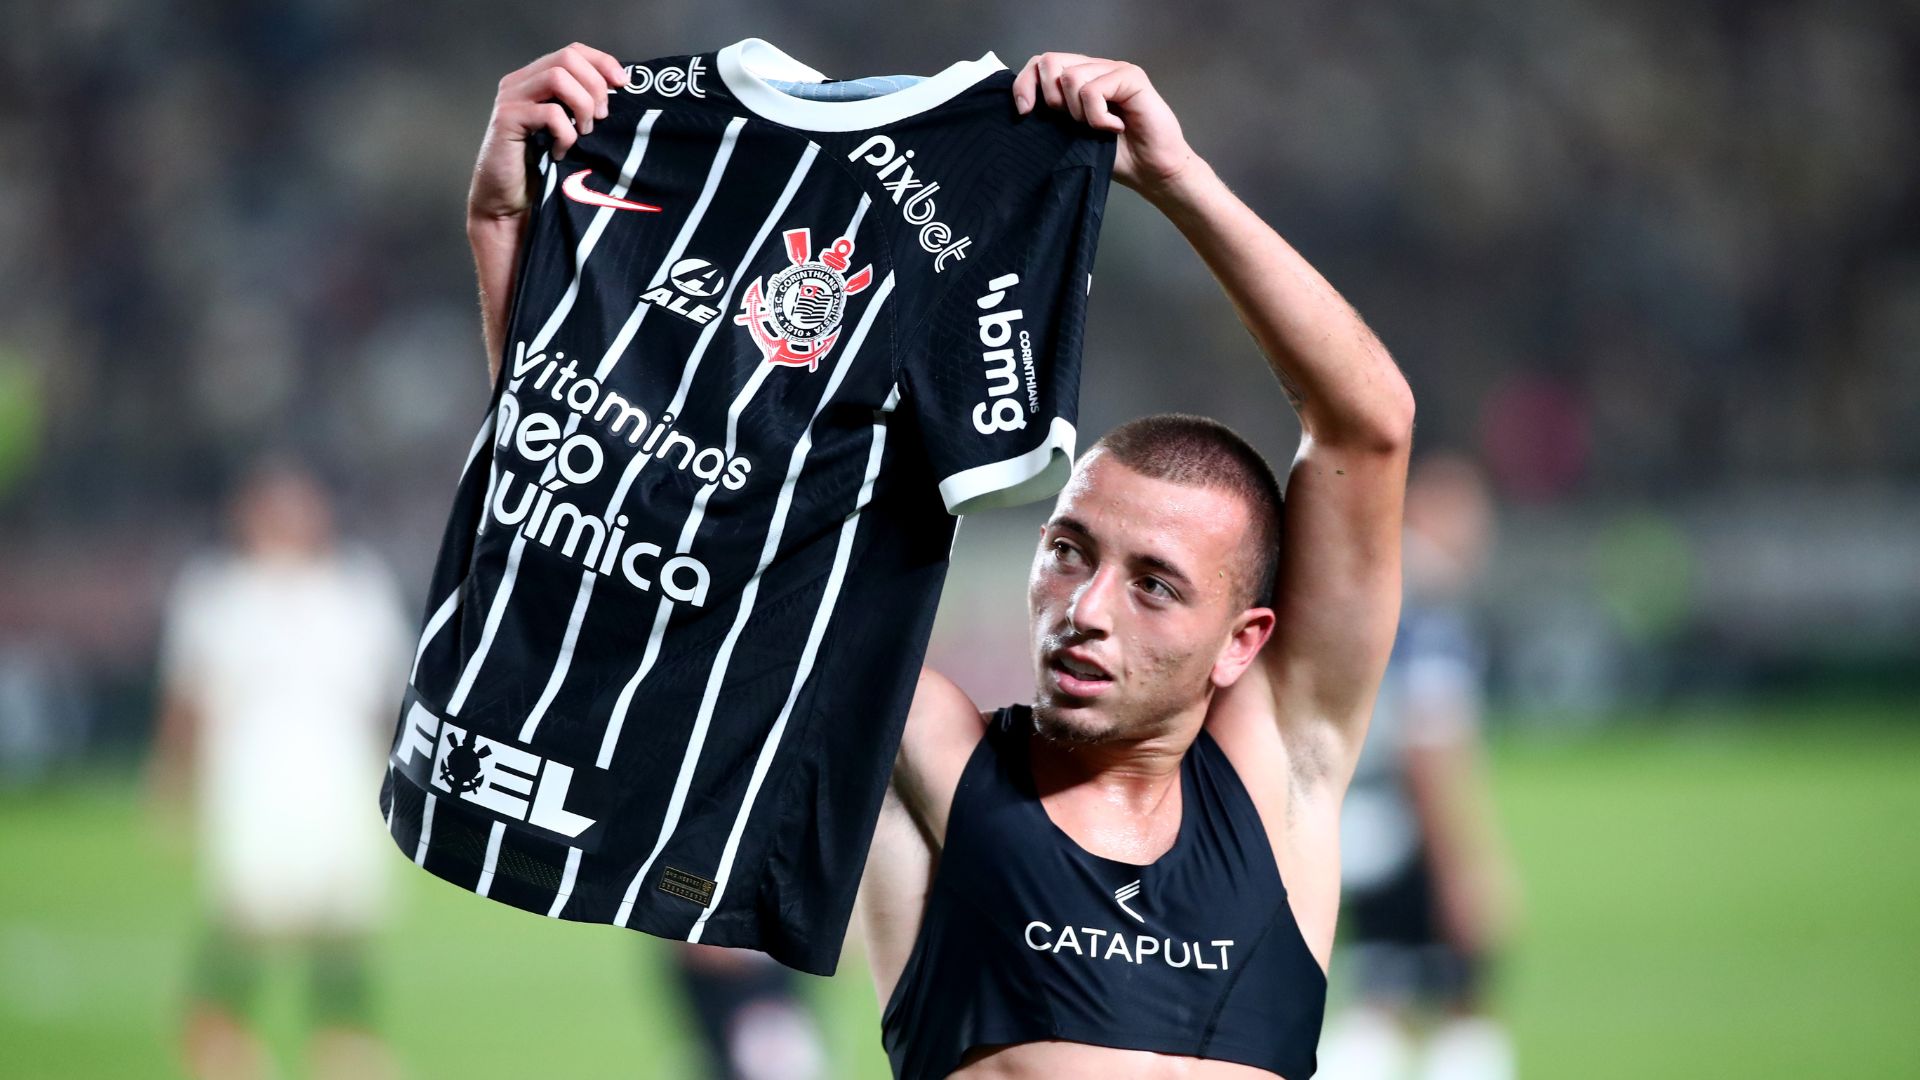 Ryan celebrated his first goal for Timão by showing his shirt to the crowd